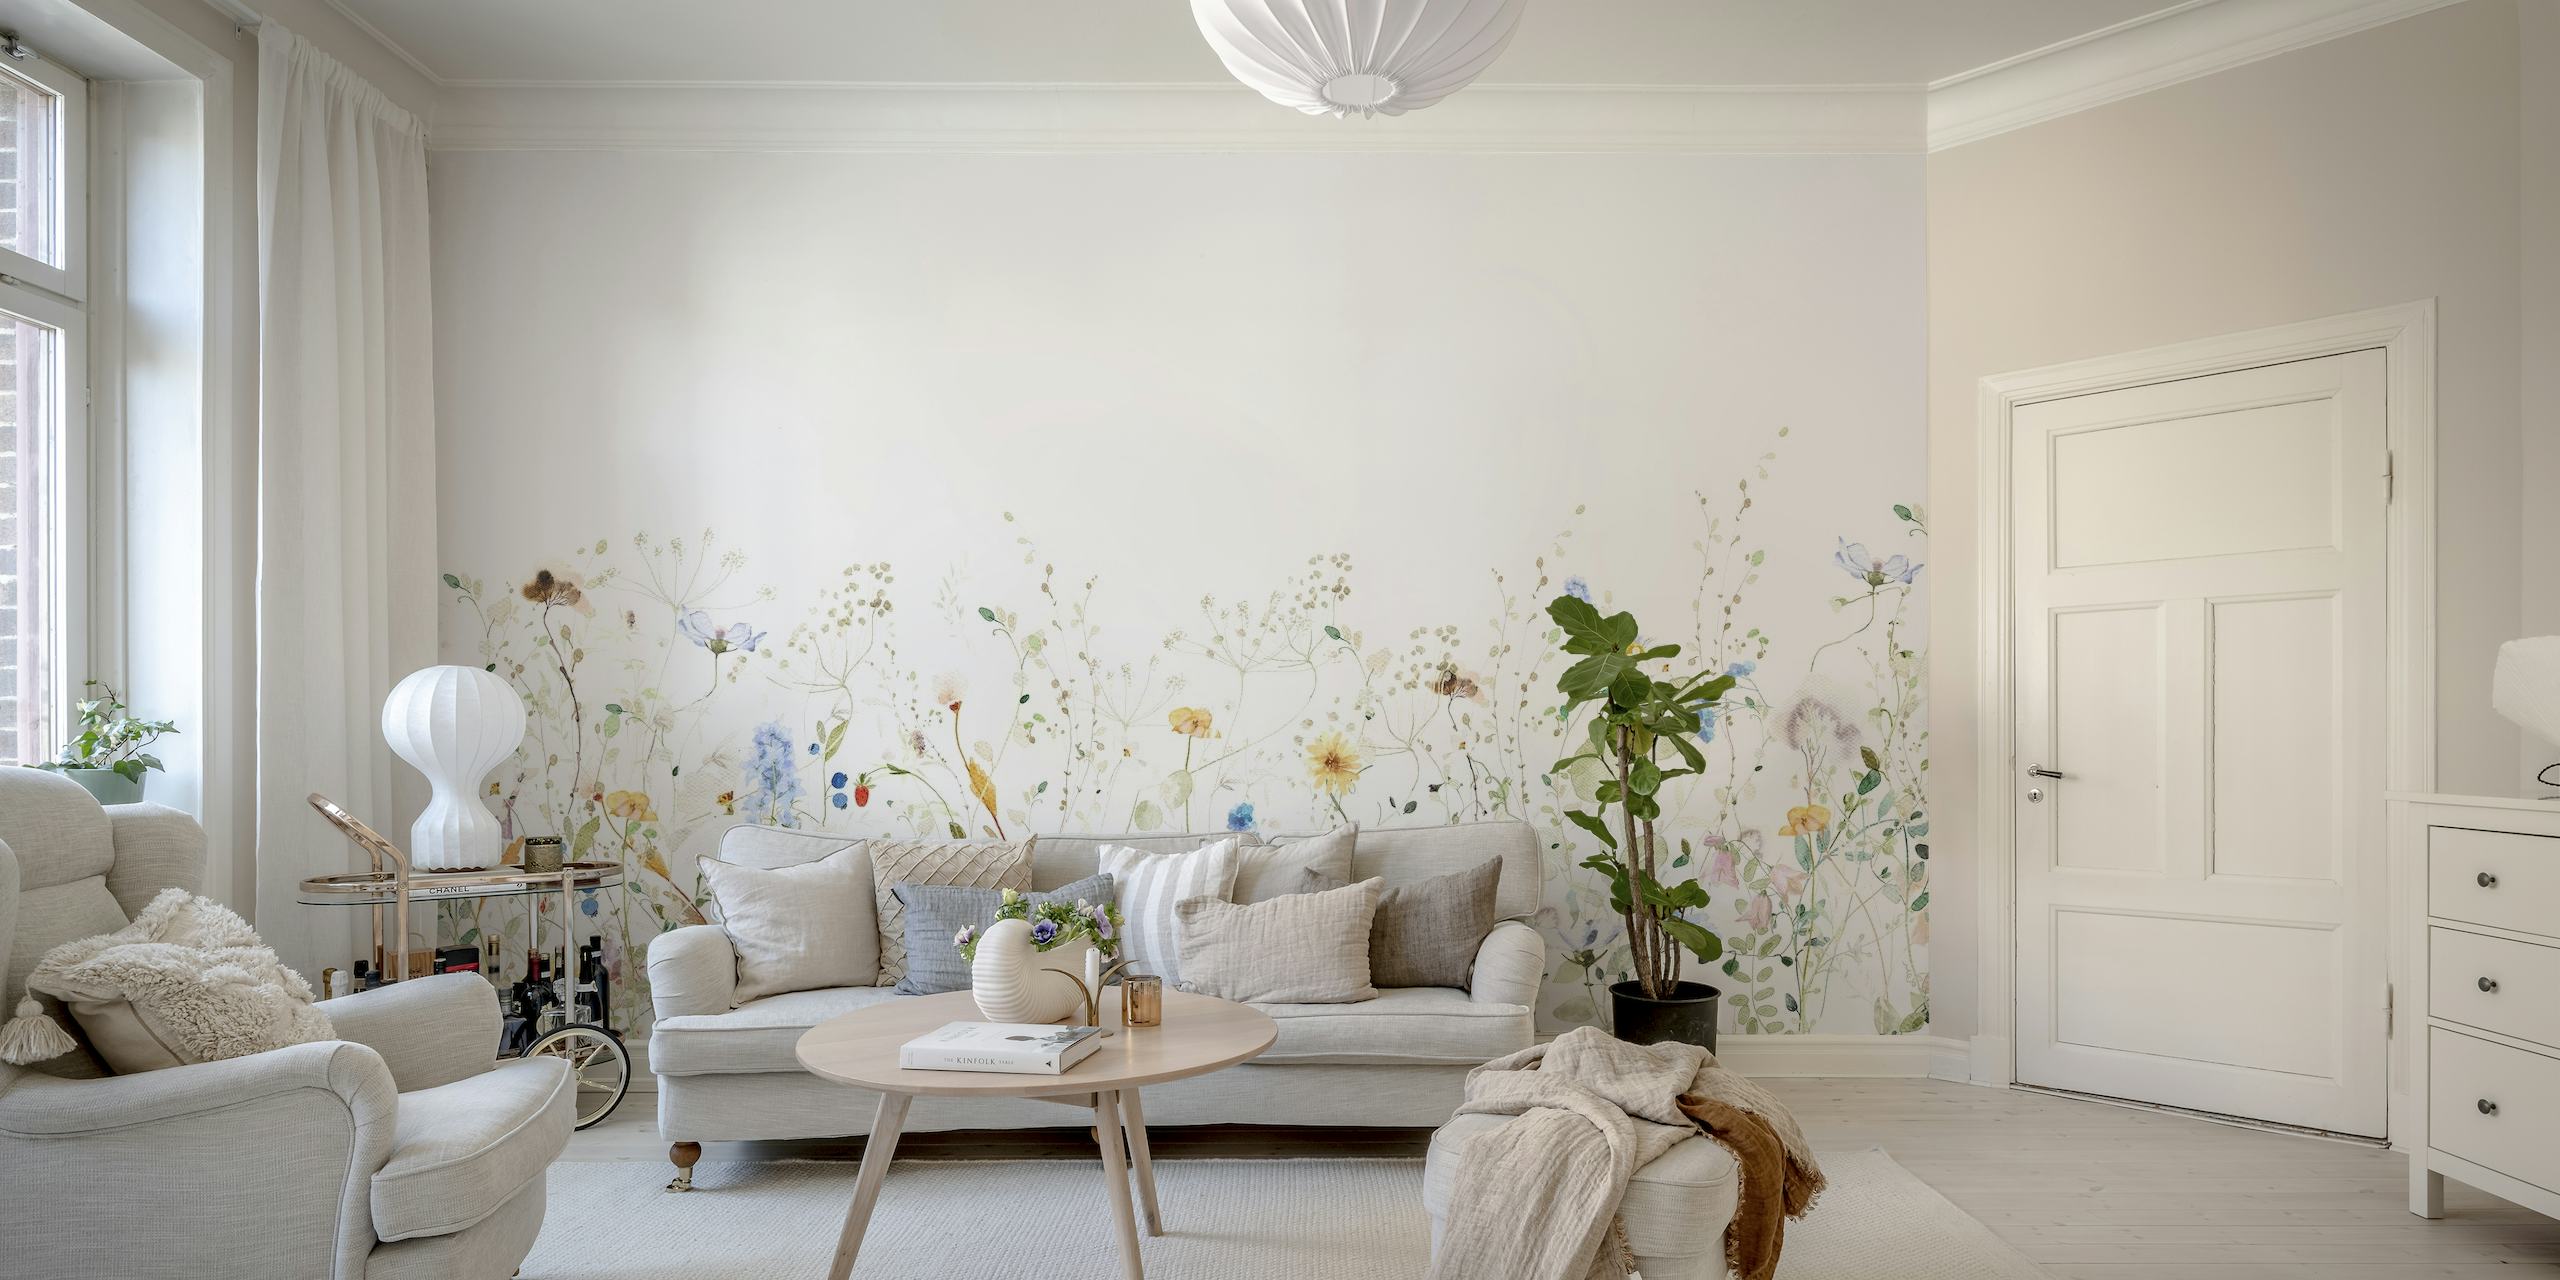 Colorful wildflowers delicately dispersed across a light background, creating a lush meadow-like wall mural